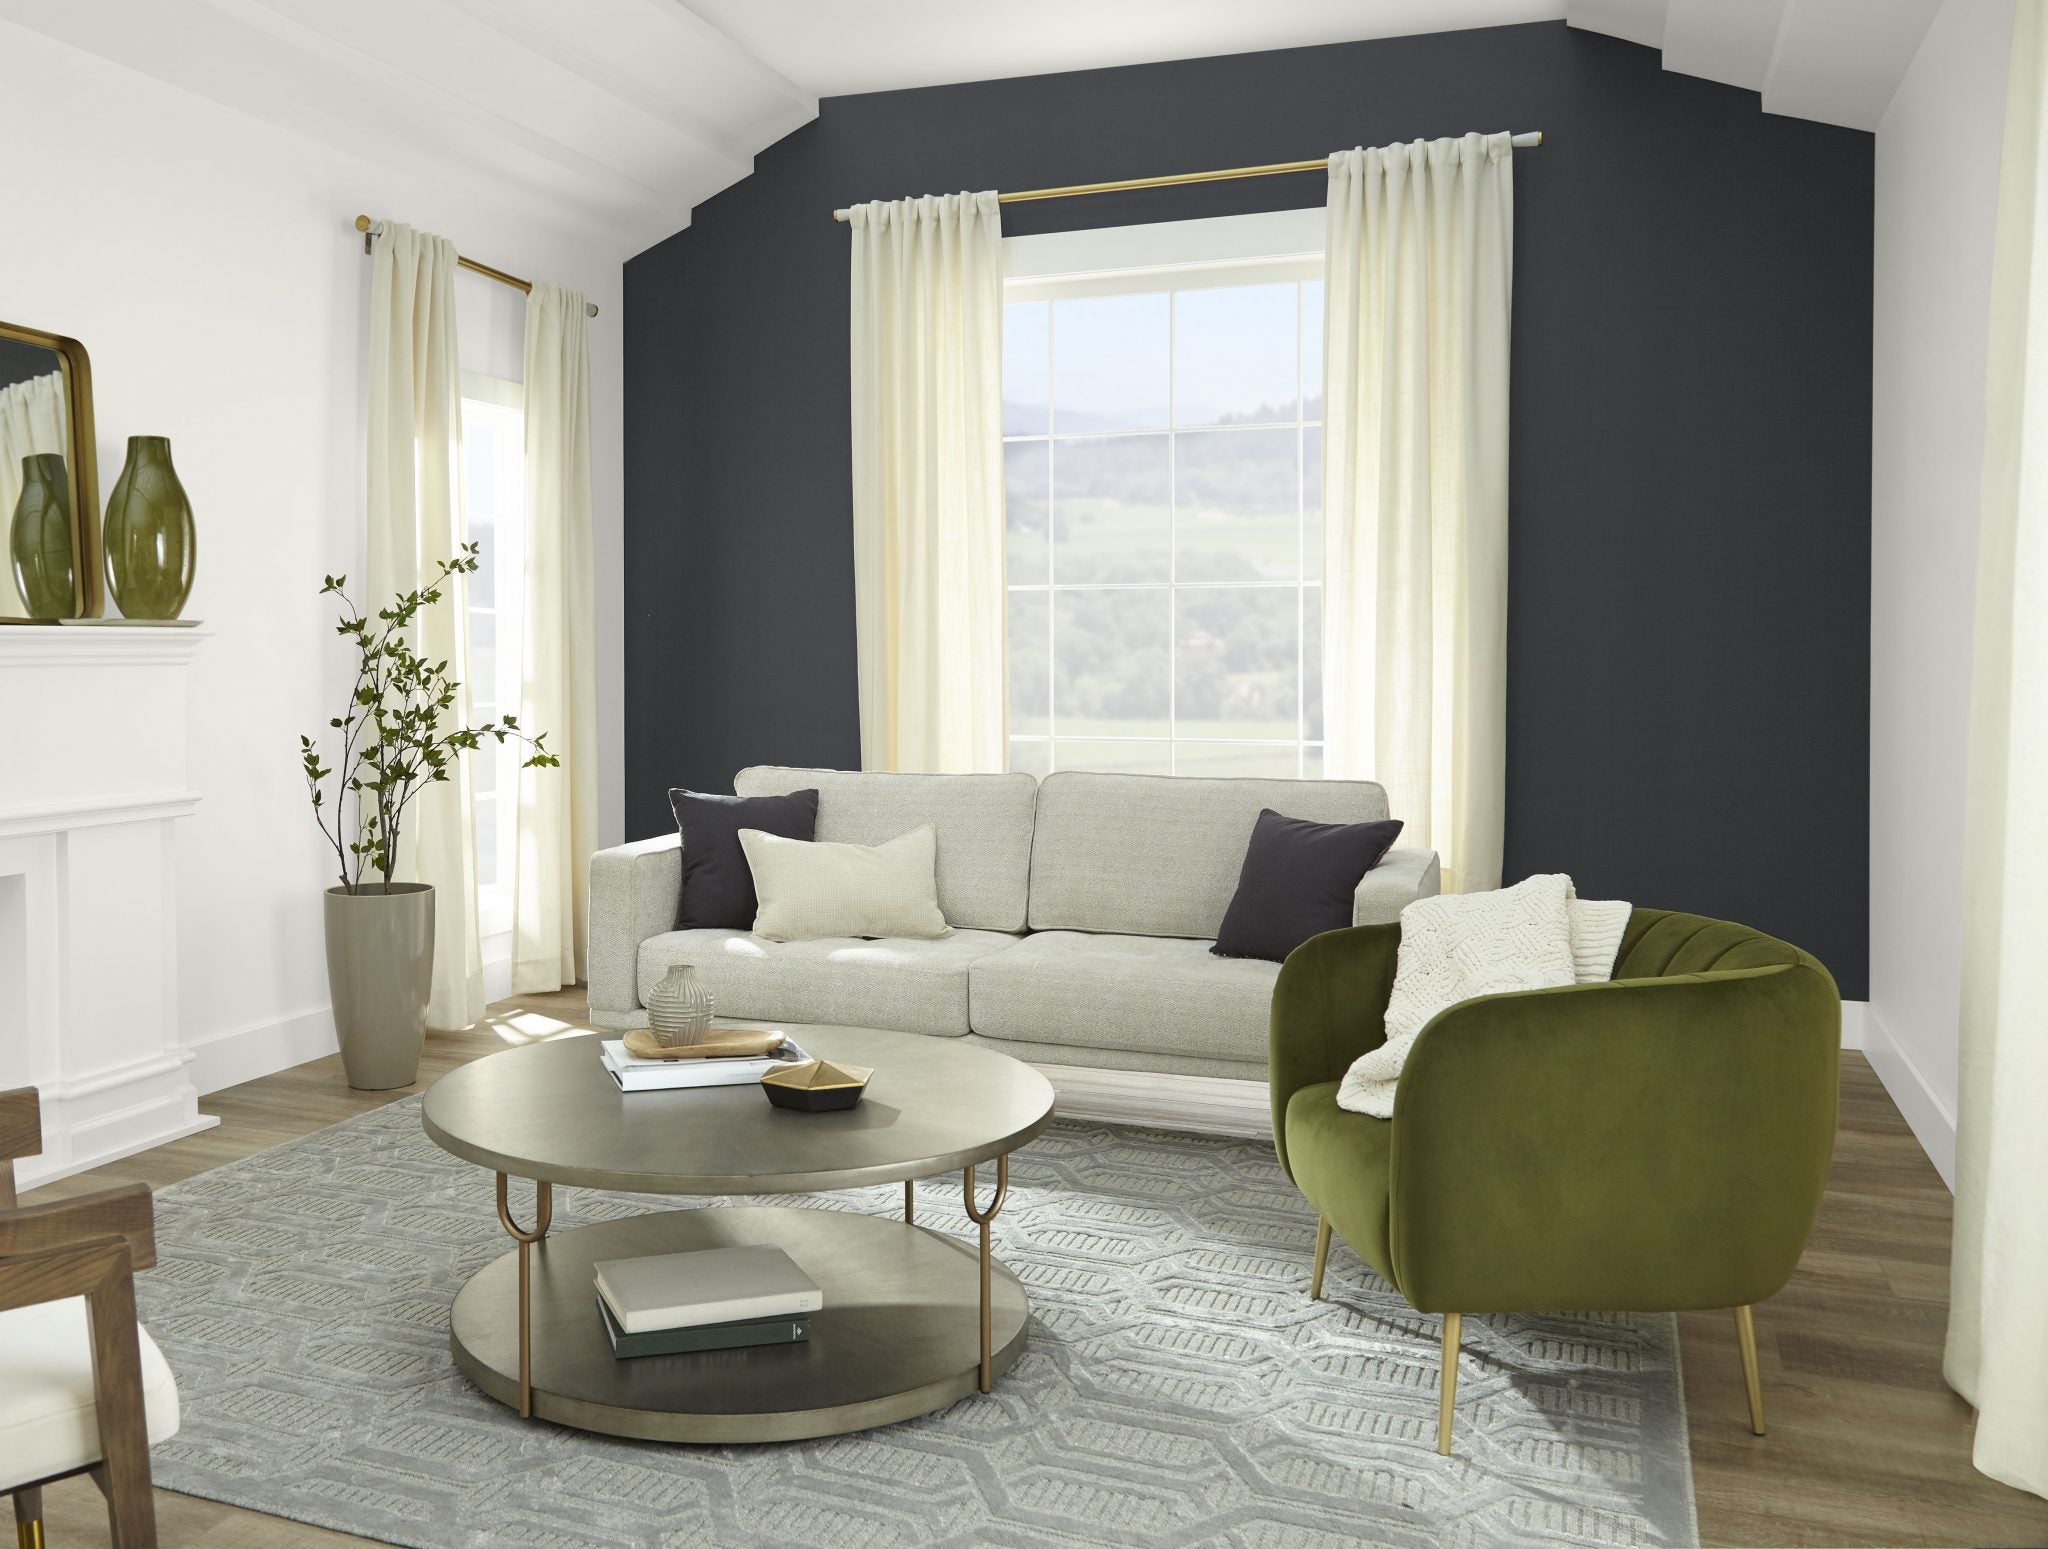 BEHR Just Announced Their 2024 Color Of The Year, And It’s Giving Elevated Luxury